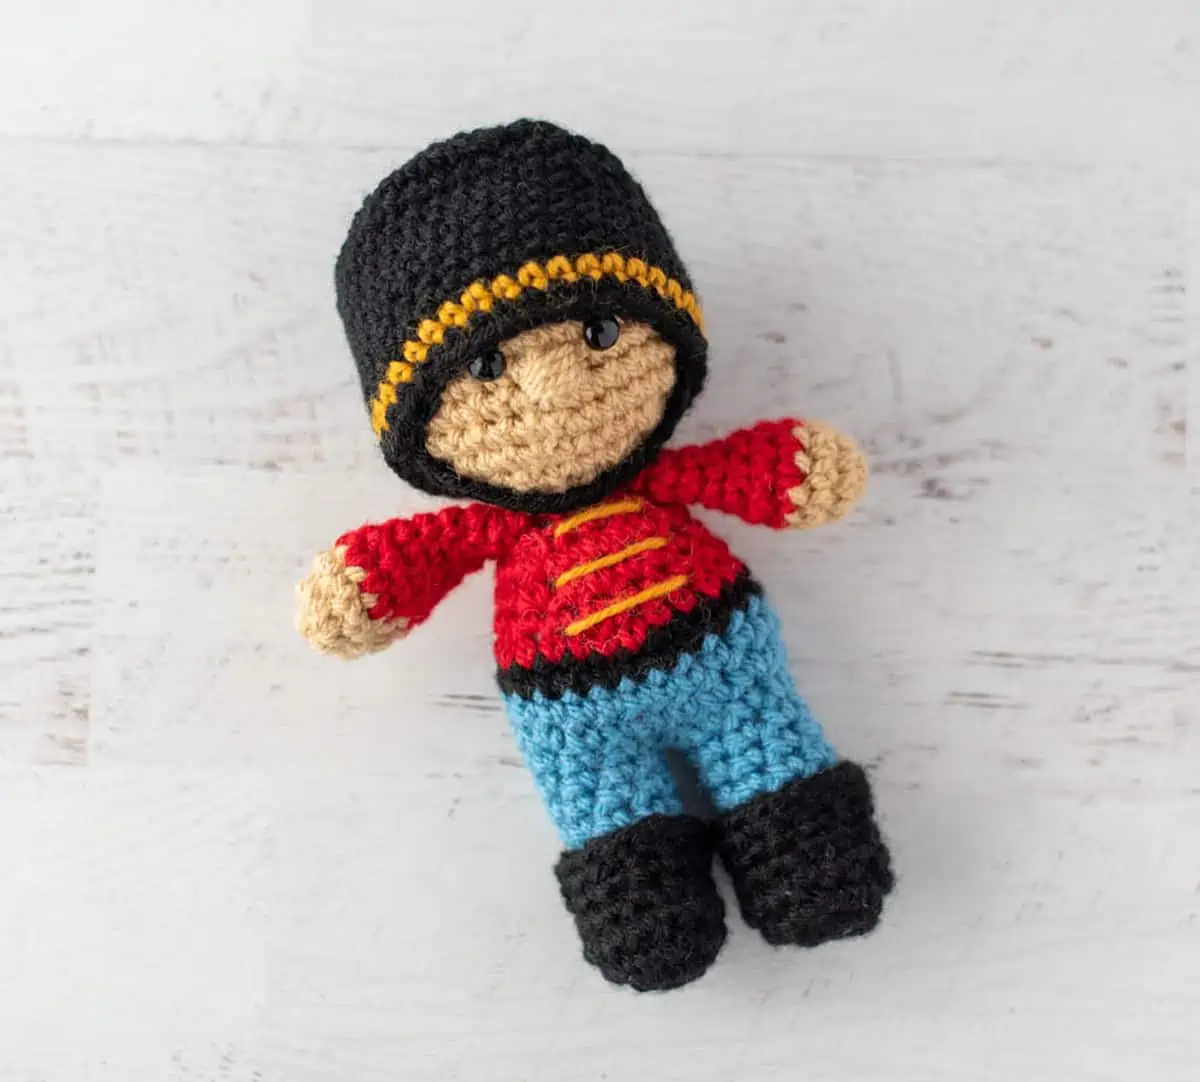 Crochet nutcracker doll, red shirt with gold trim, blue pants, black shoes and ha